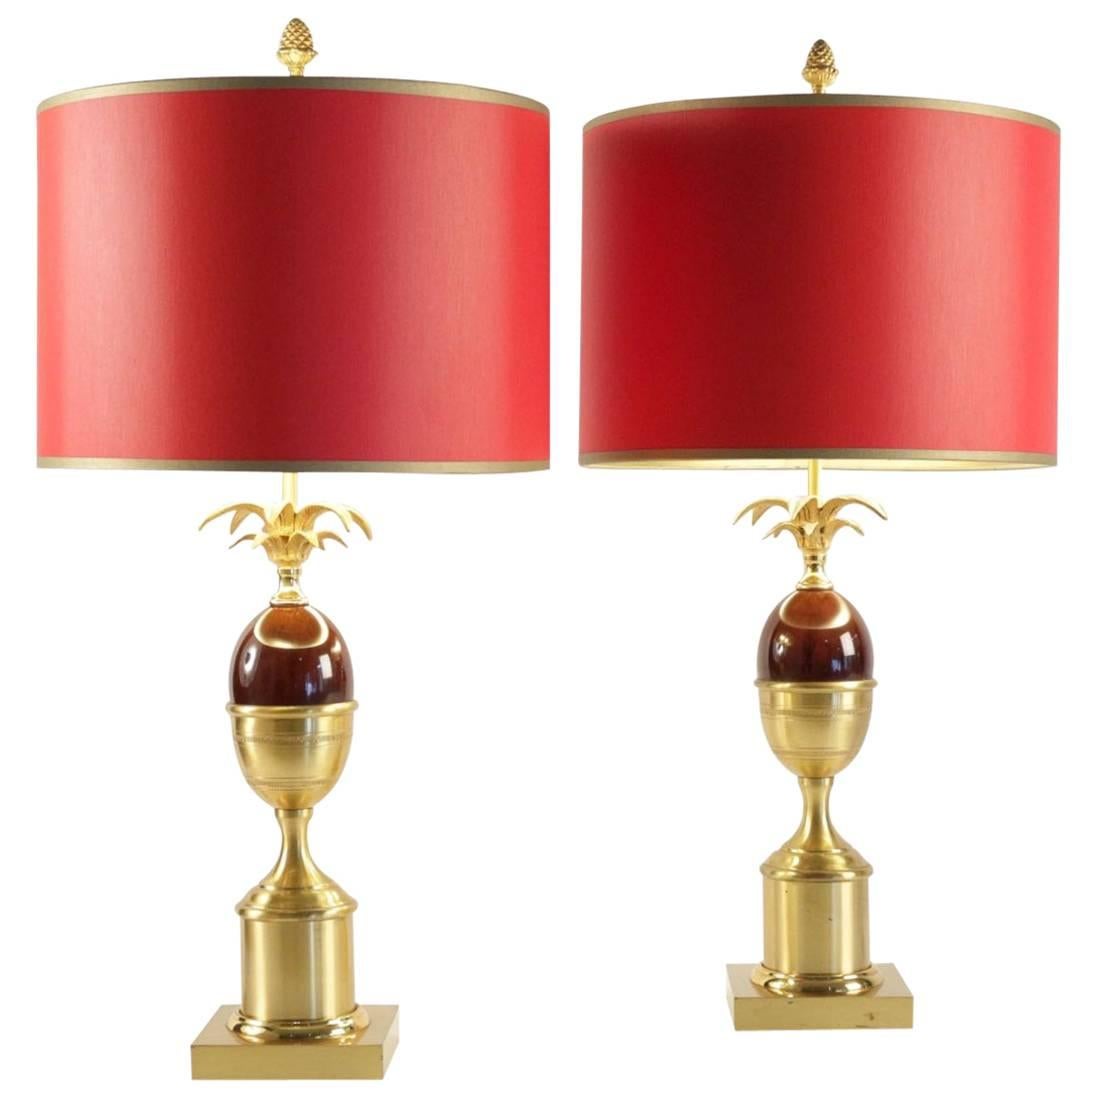 Pair of Lamps, 1960s, Brass and Resin of Red Color in the Taste of Charles